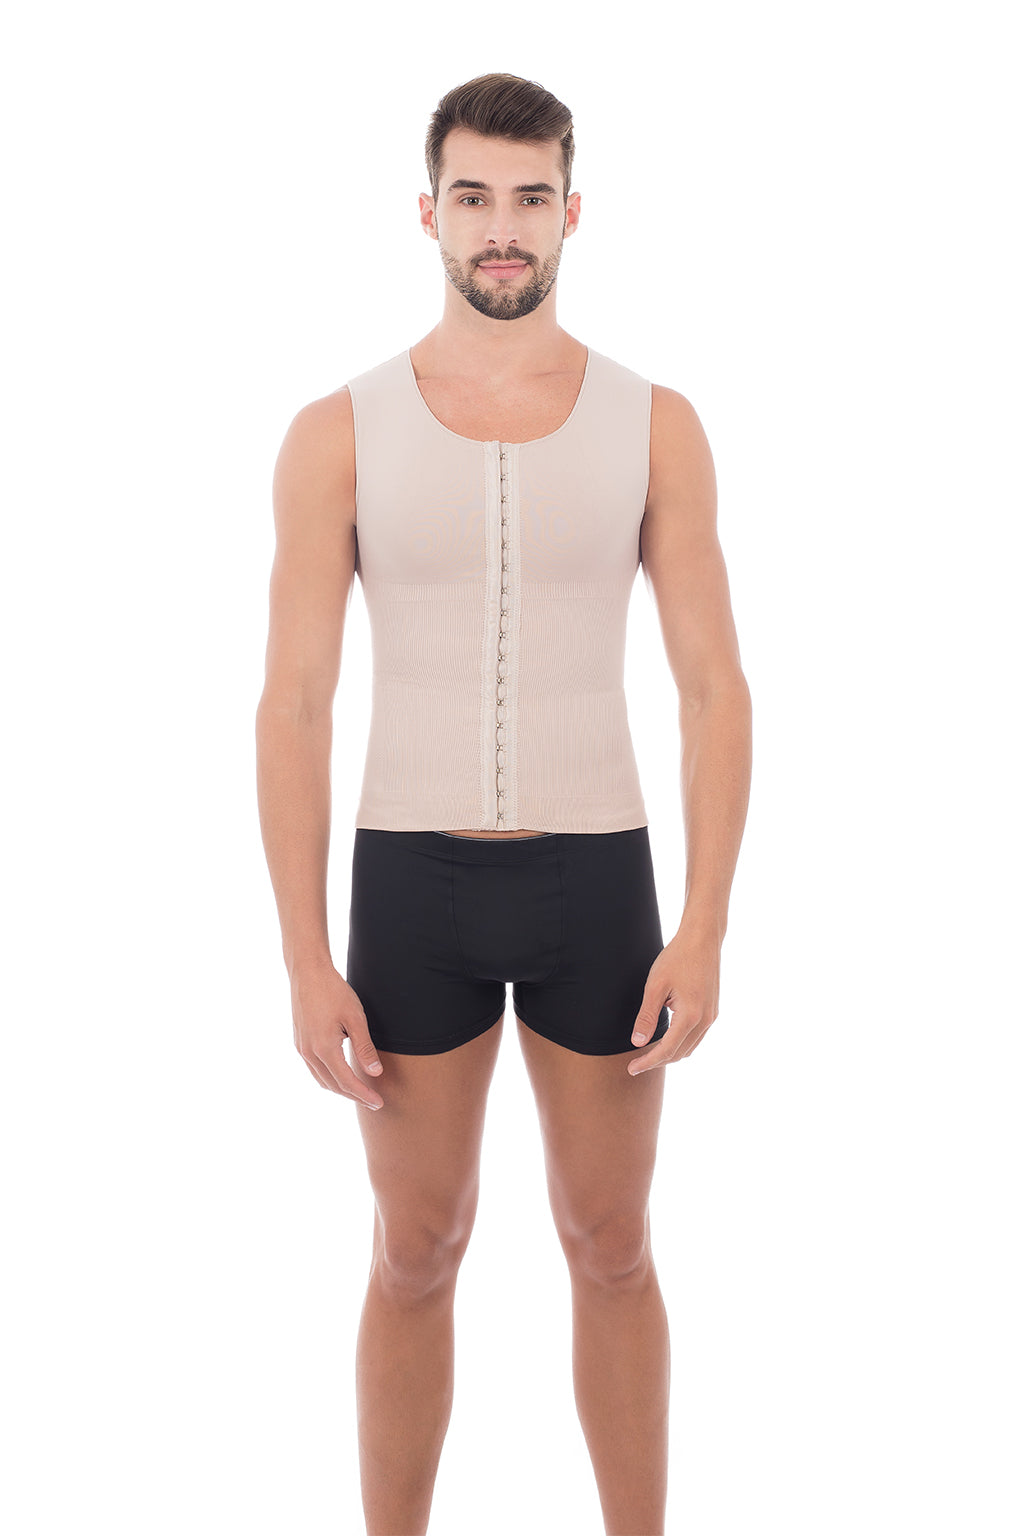 Shop Waist Training Men Corset with great discounts and prices